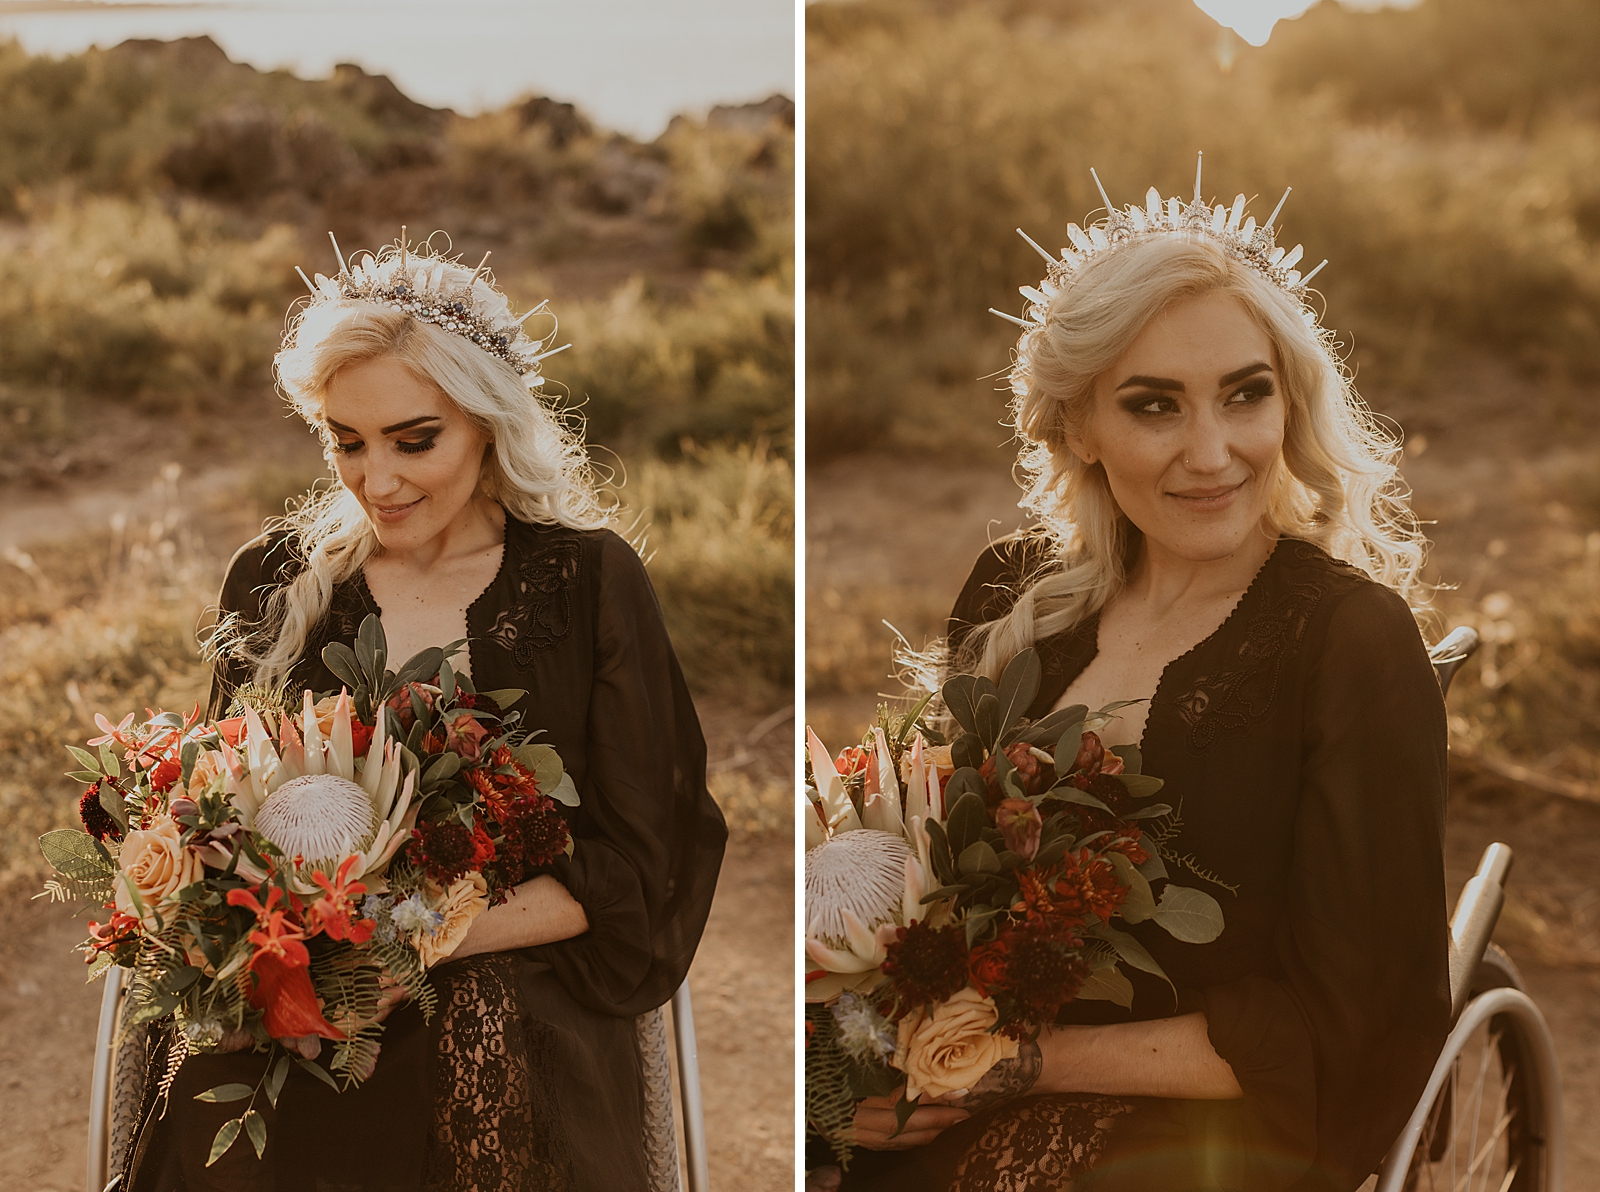 Portraits of Bride in the wheel chair with crown and holding bouquet